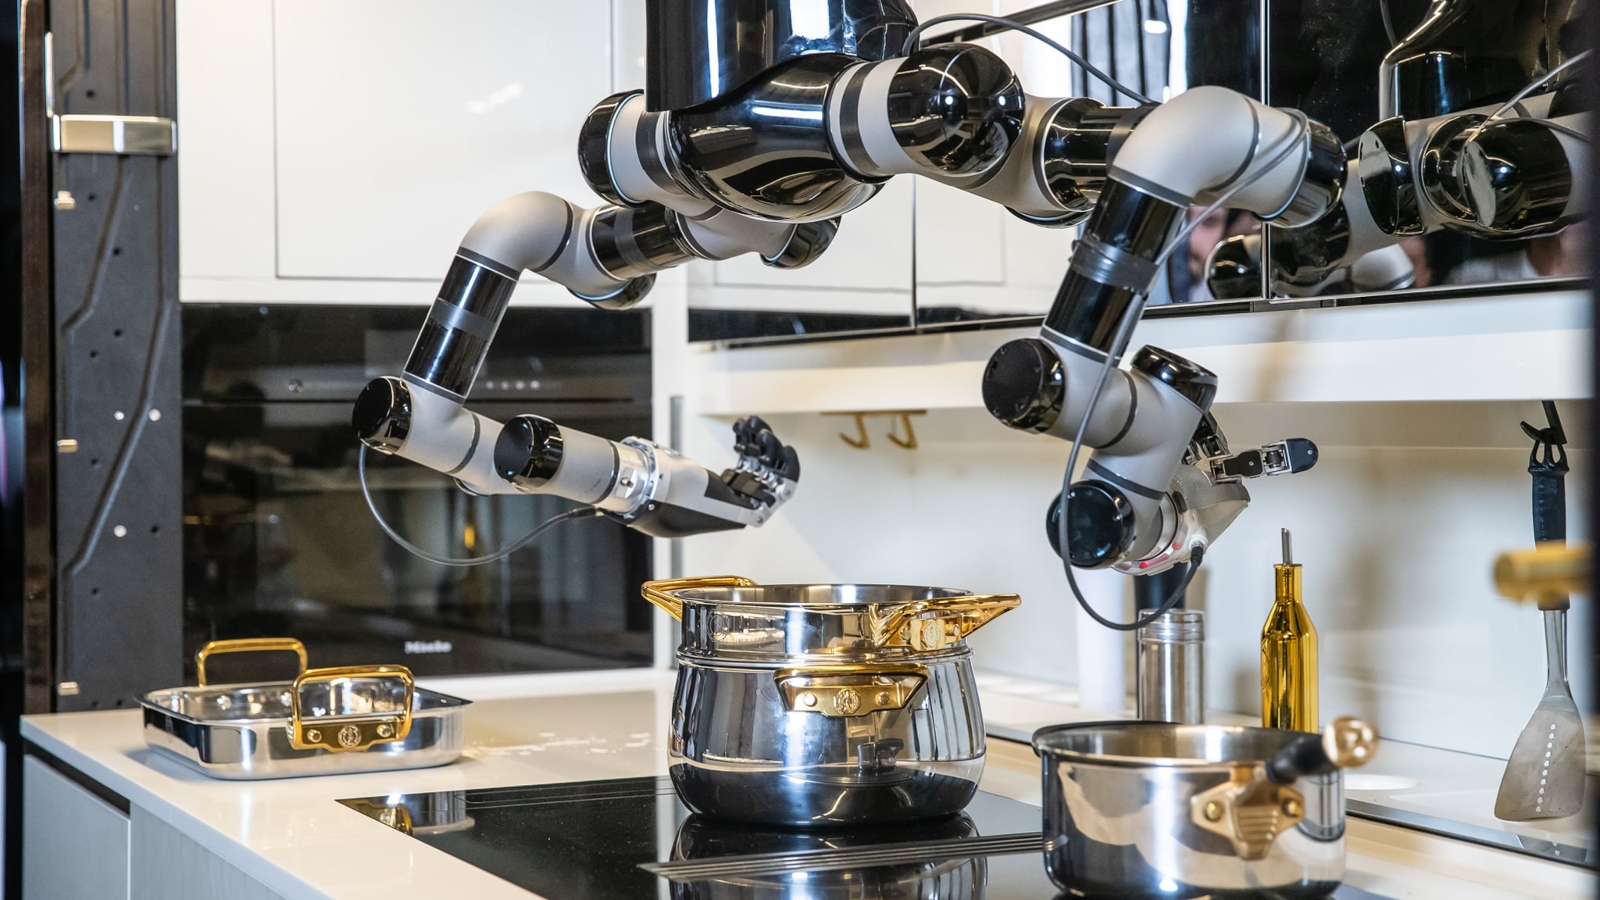 The Moley Robotics Kitchen Is The Robot Chef You Need In ...